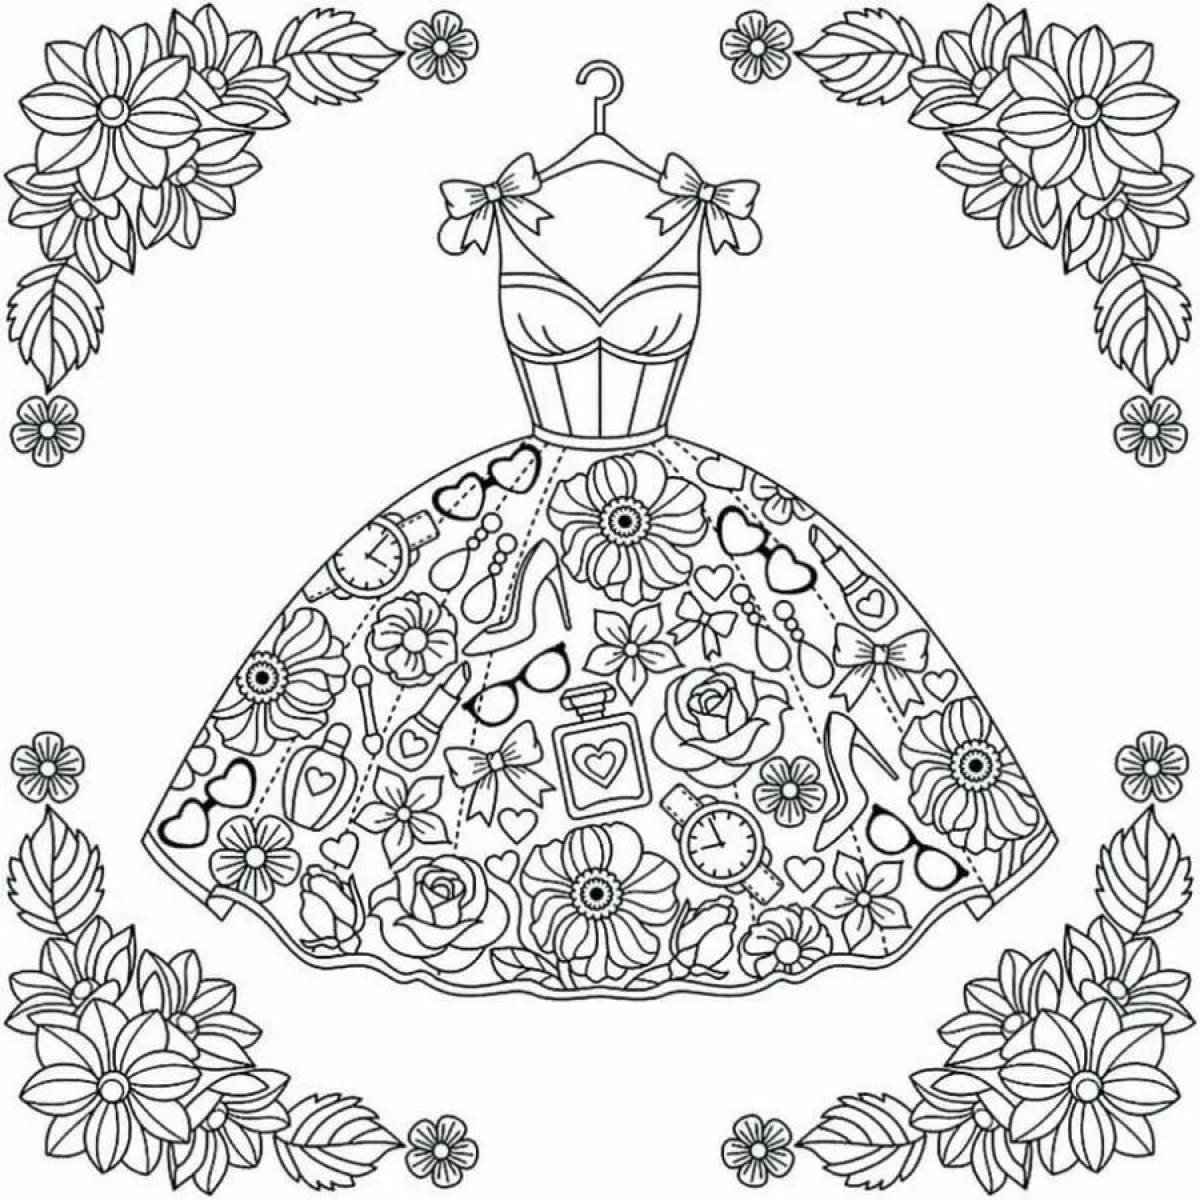 Coloring book sparkling puffy dress